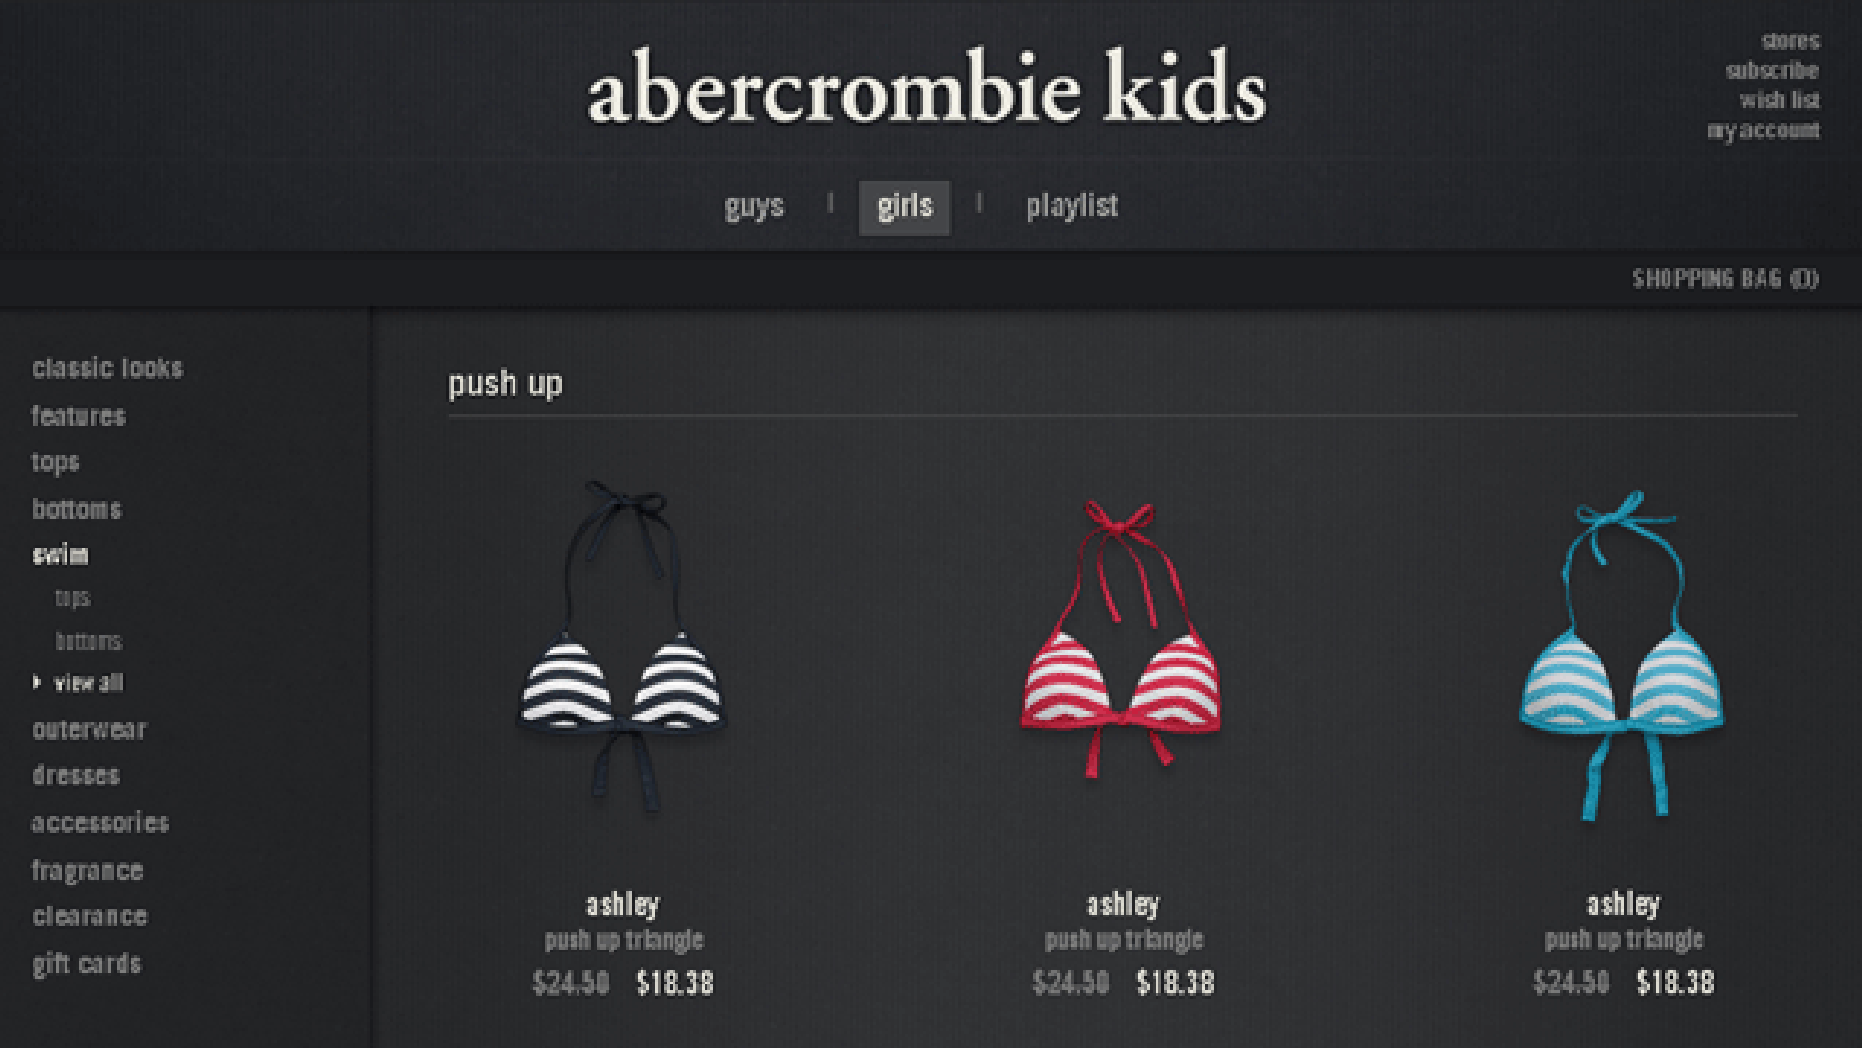 abercrombie and fitch toddler